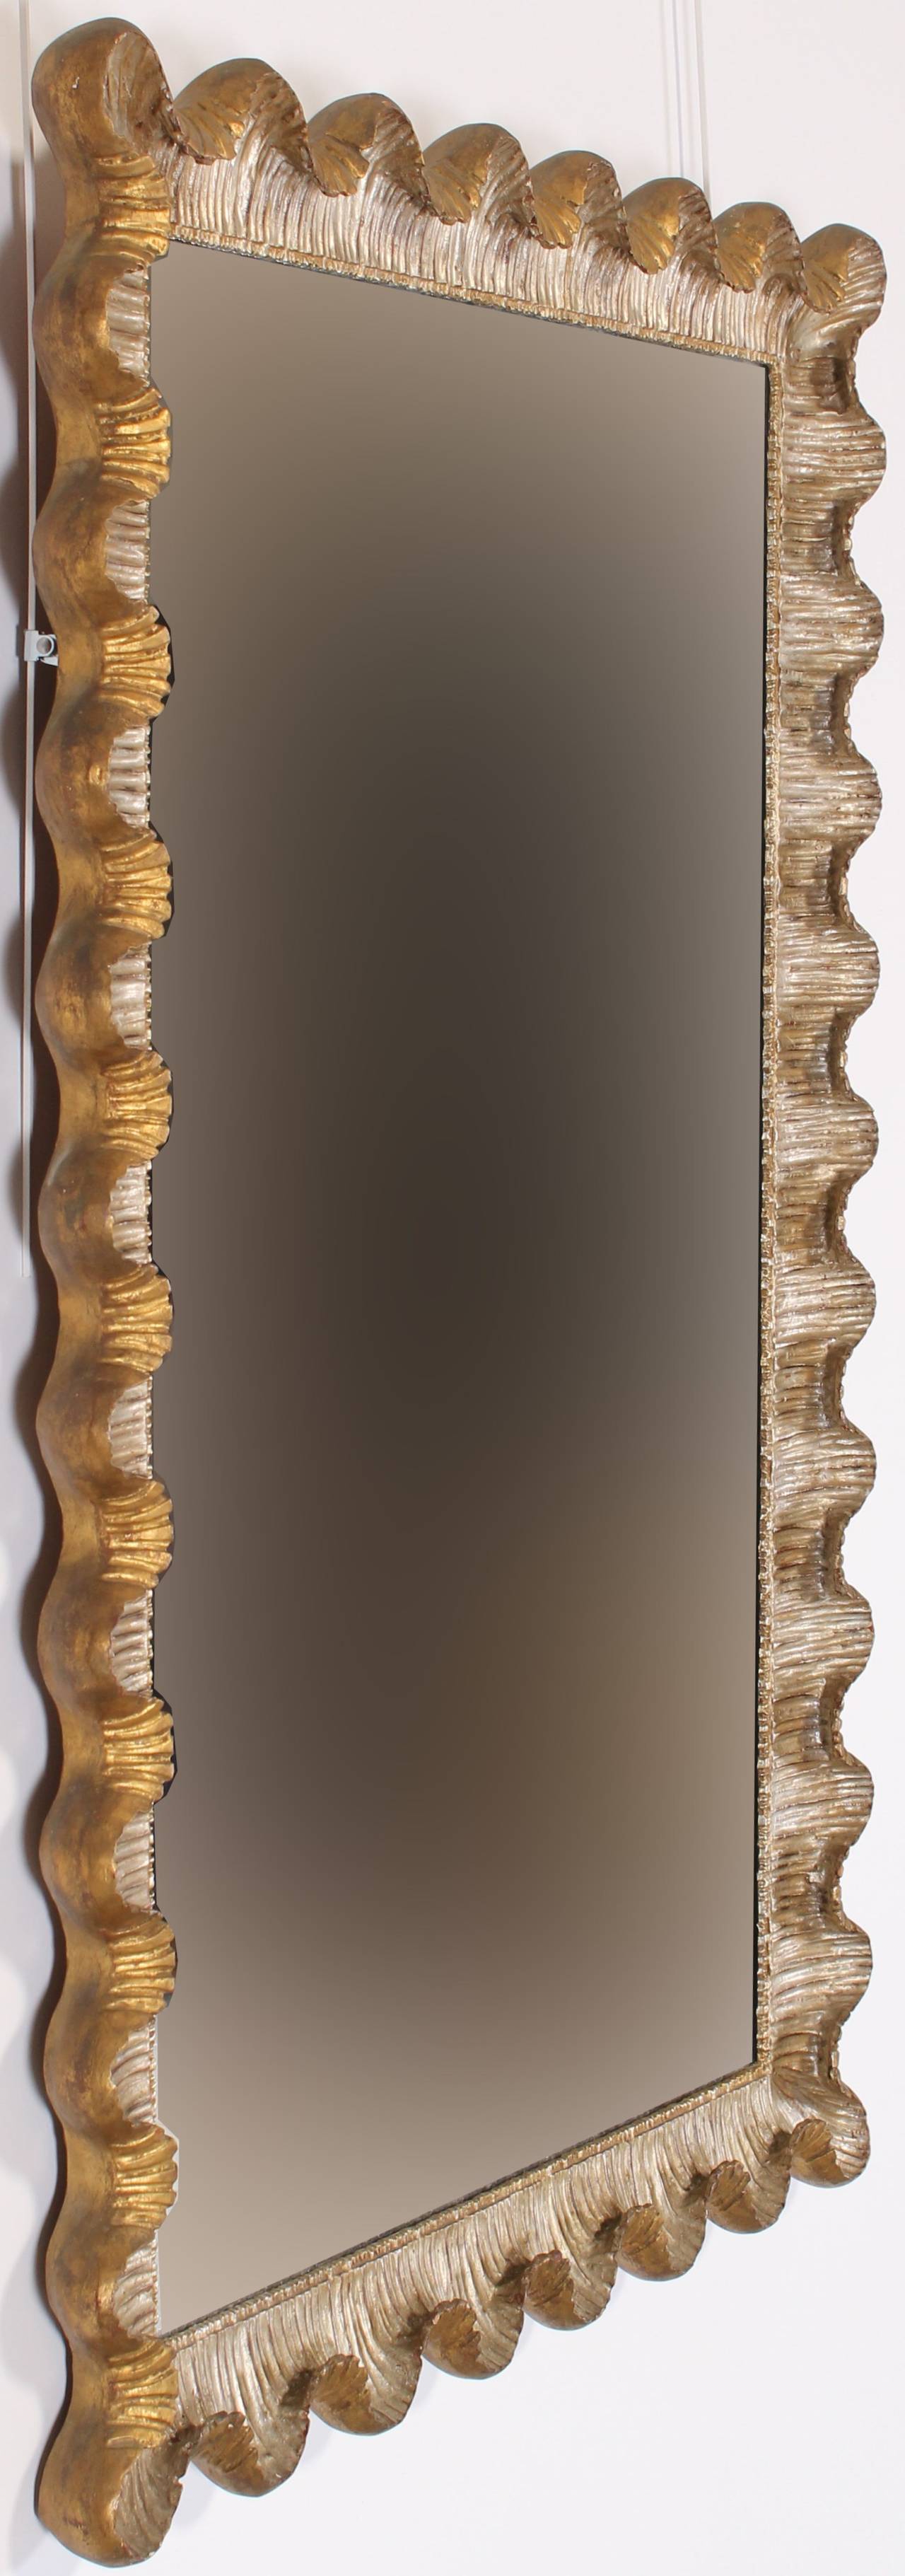 Carved Italian Scalloped Silver and Gold Gilt Frame Friedman Brothers Mirror